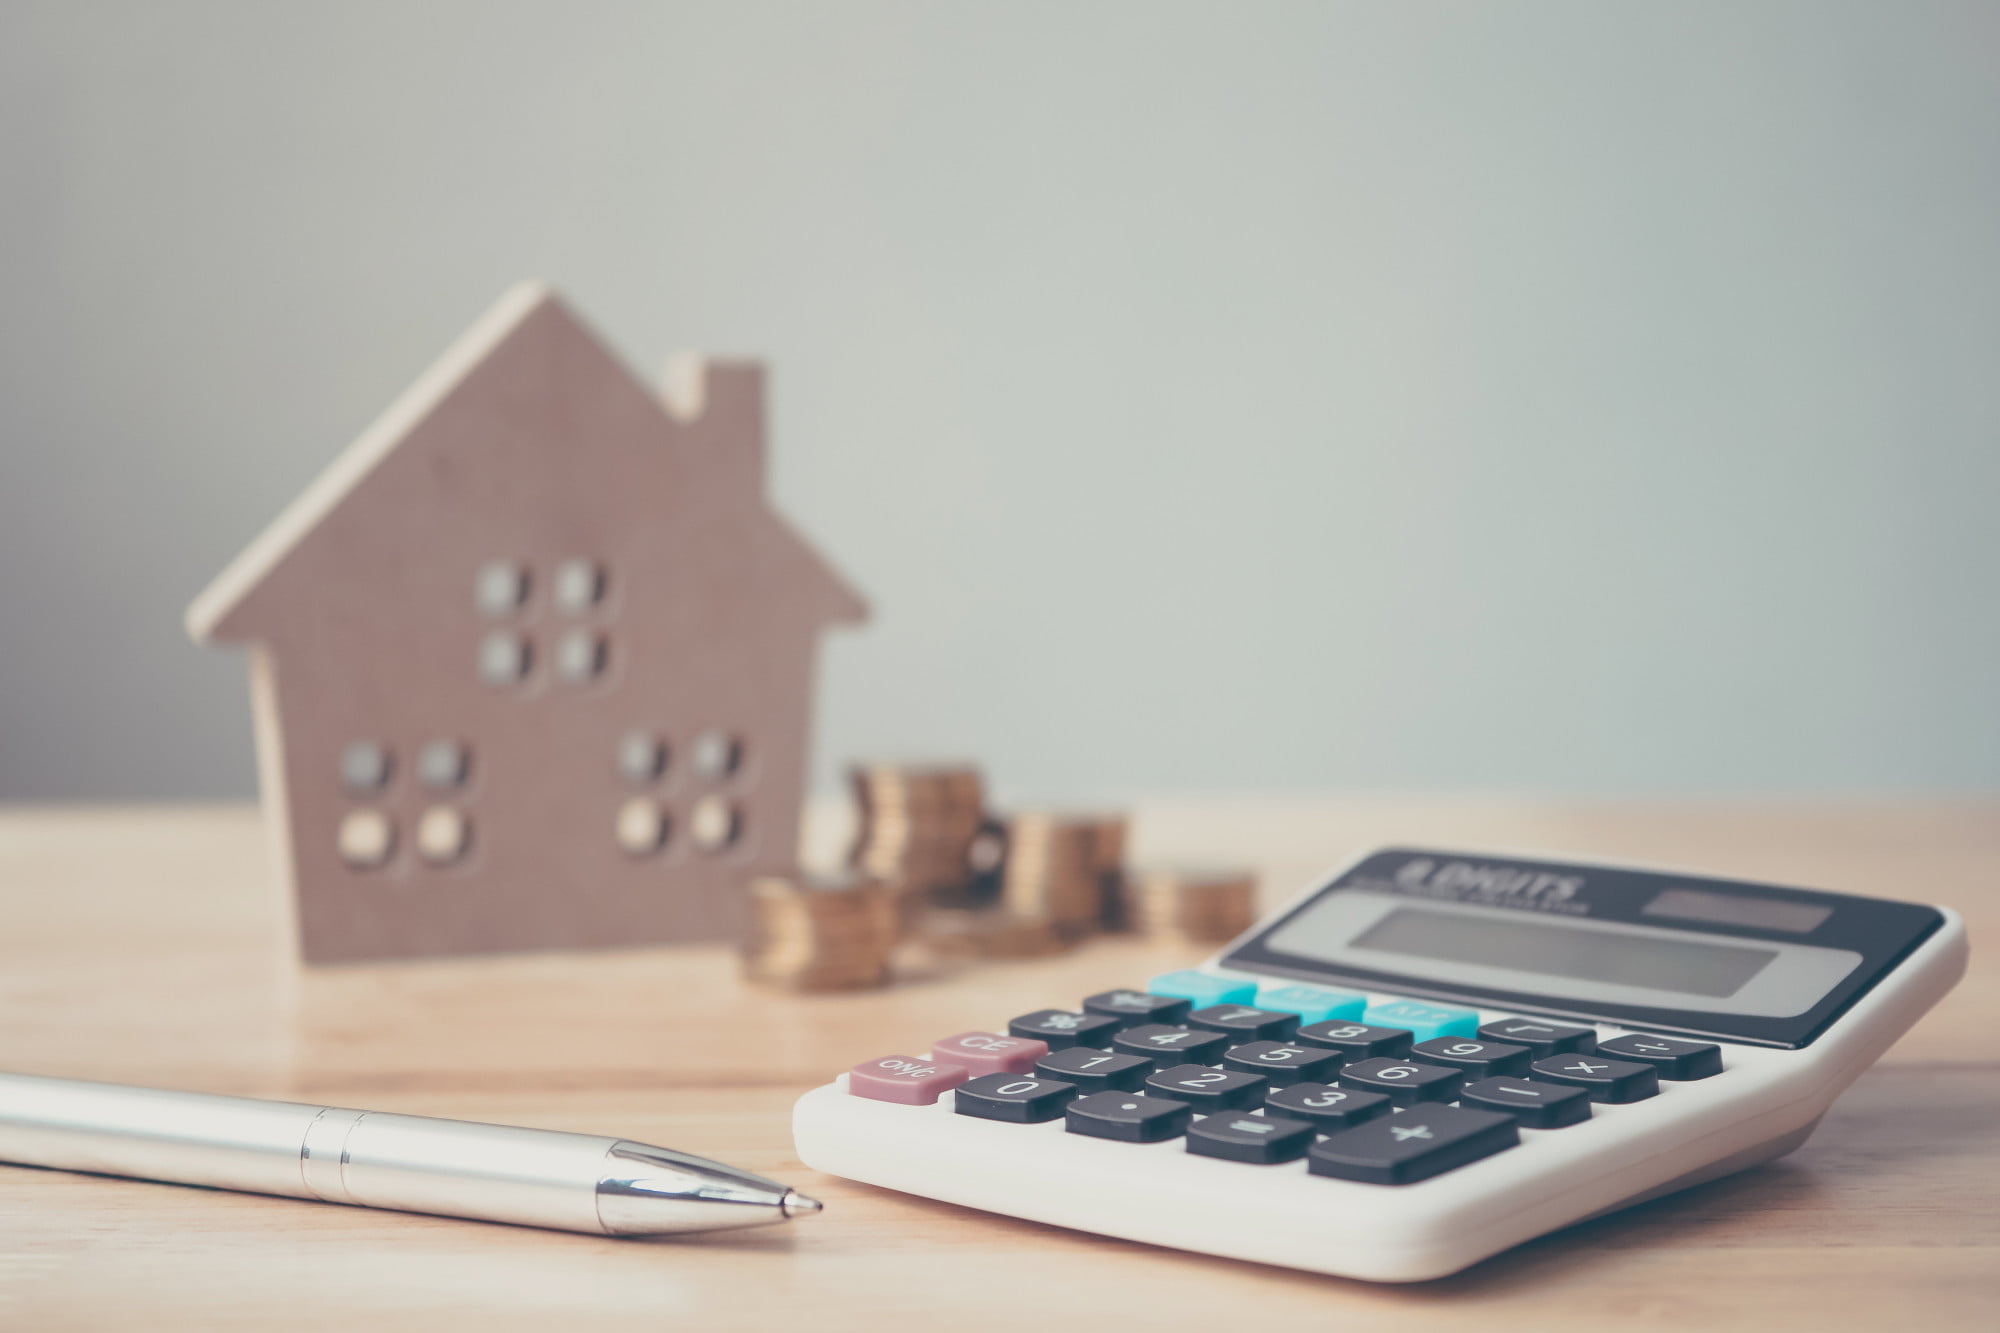 There are several advantages of getting a mortgage loan, but how do home mortgages work? Here are the key things you need to know.